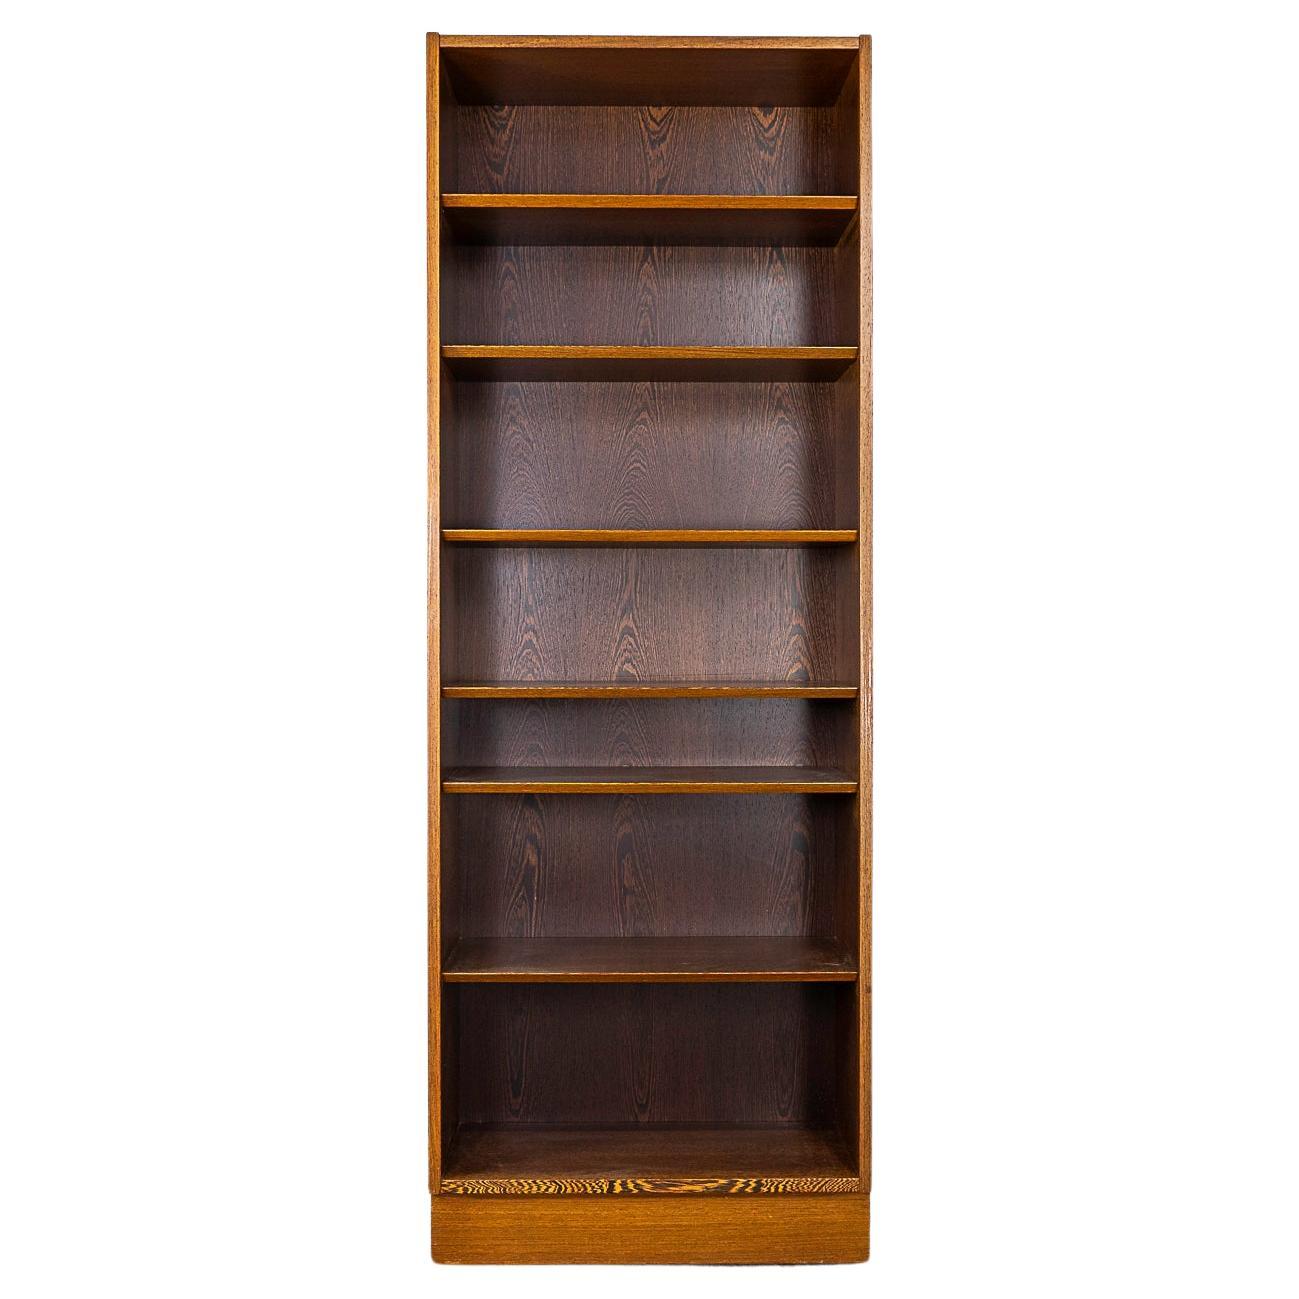 What can I use instead of a bookshelf?